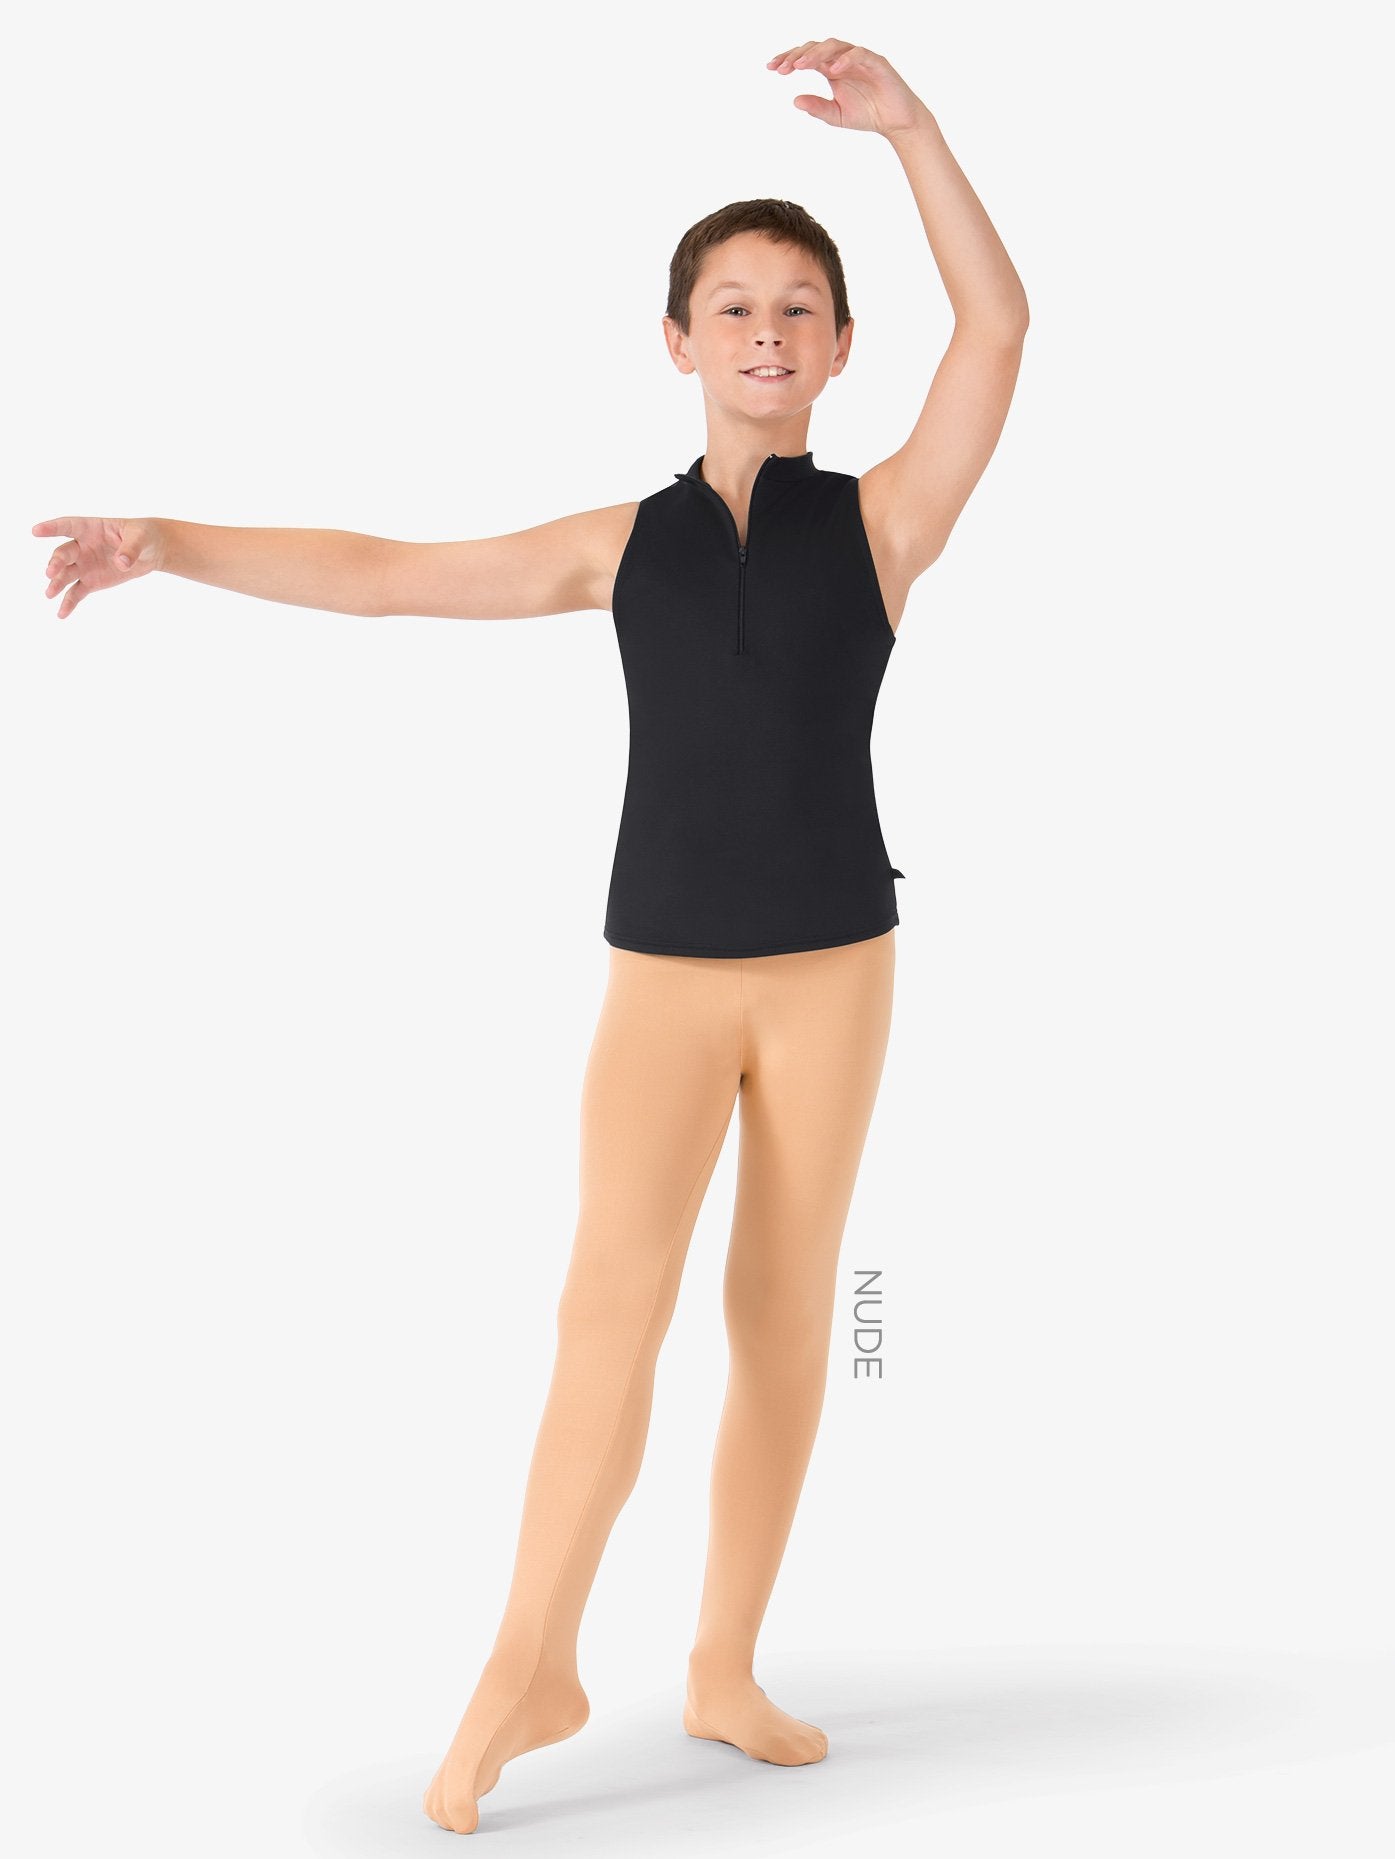 Mens 'Viggo' Convertible Tan Dance Tights: Versatile and comfortable tights for male dancers